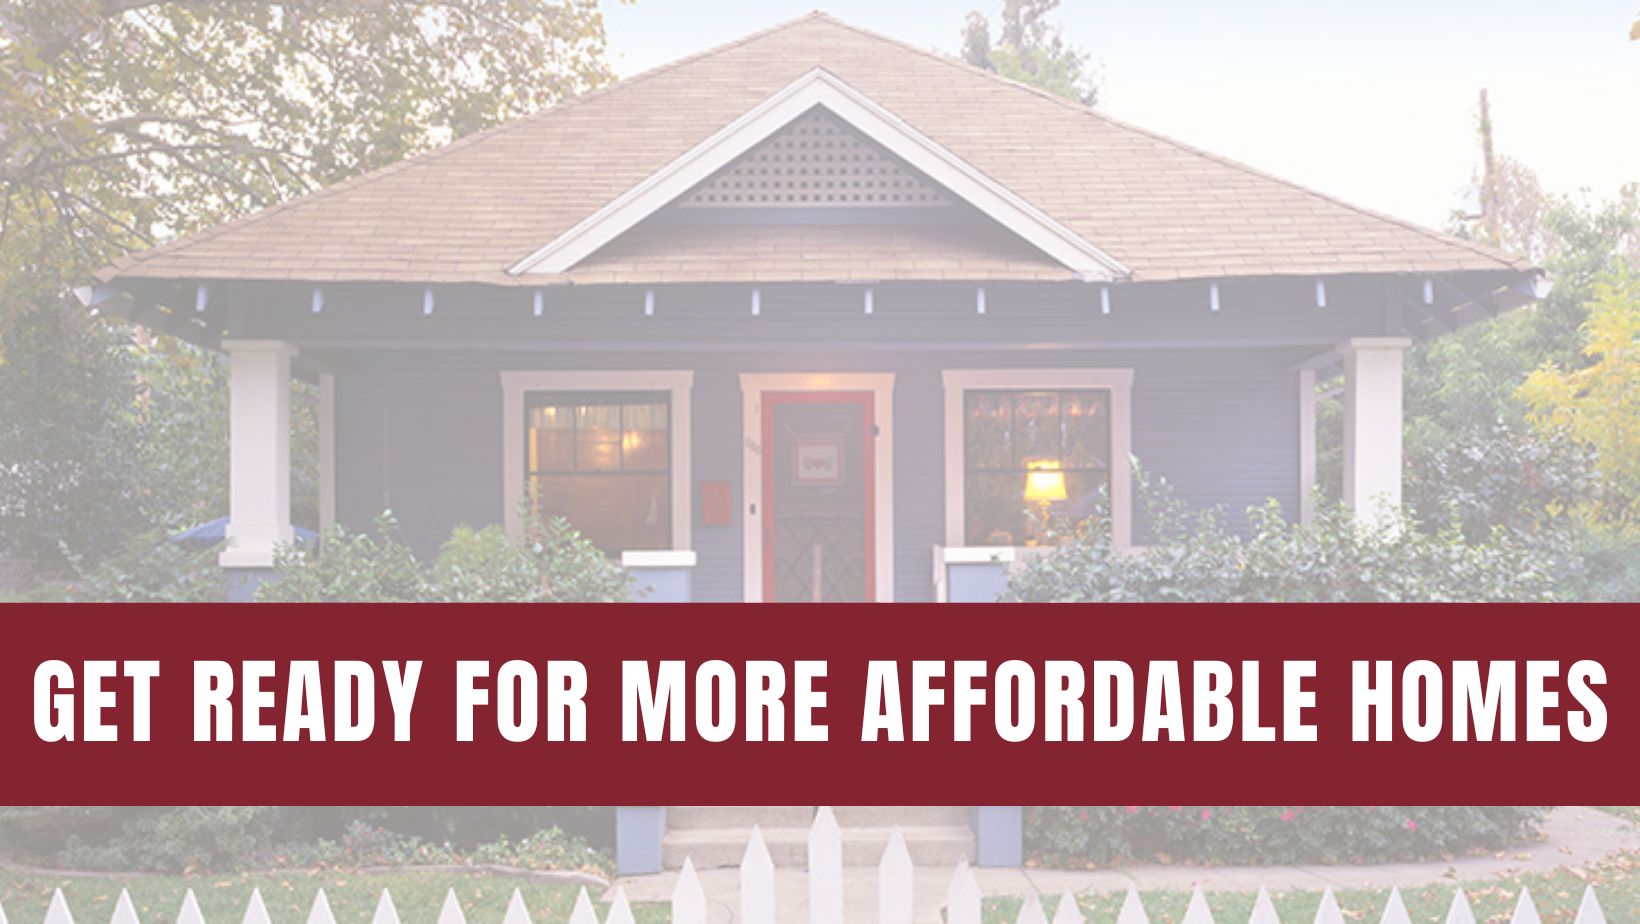 Get Ready for Smaller, More Affordable Homes